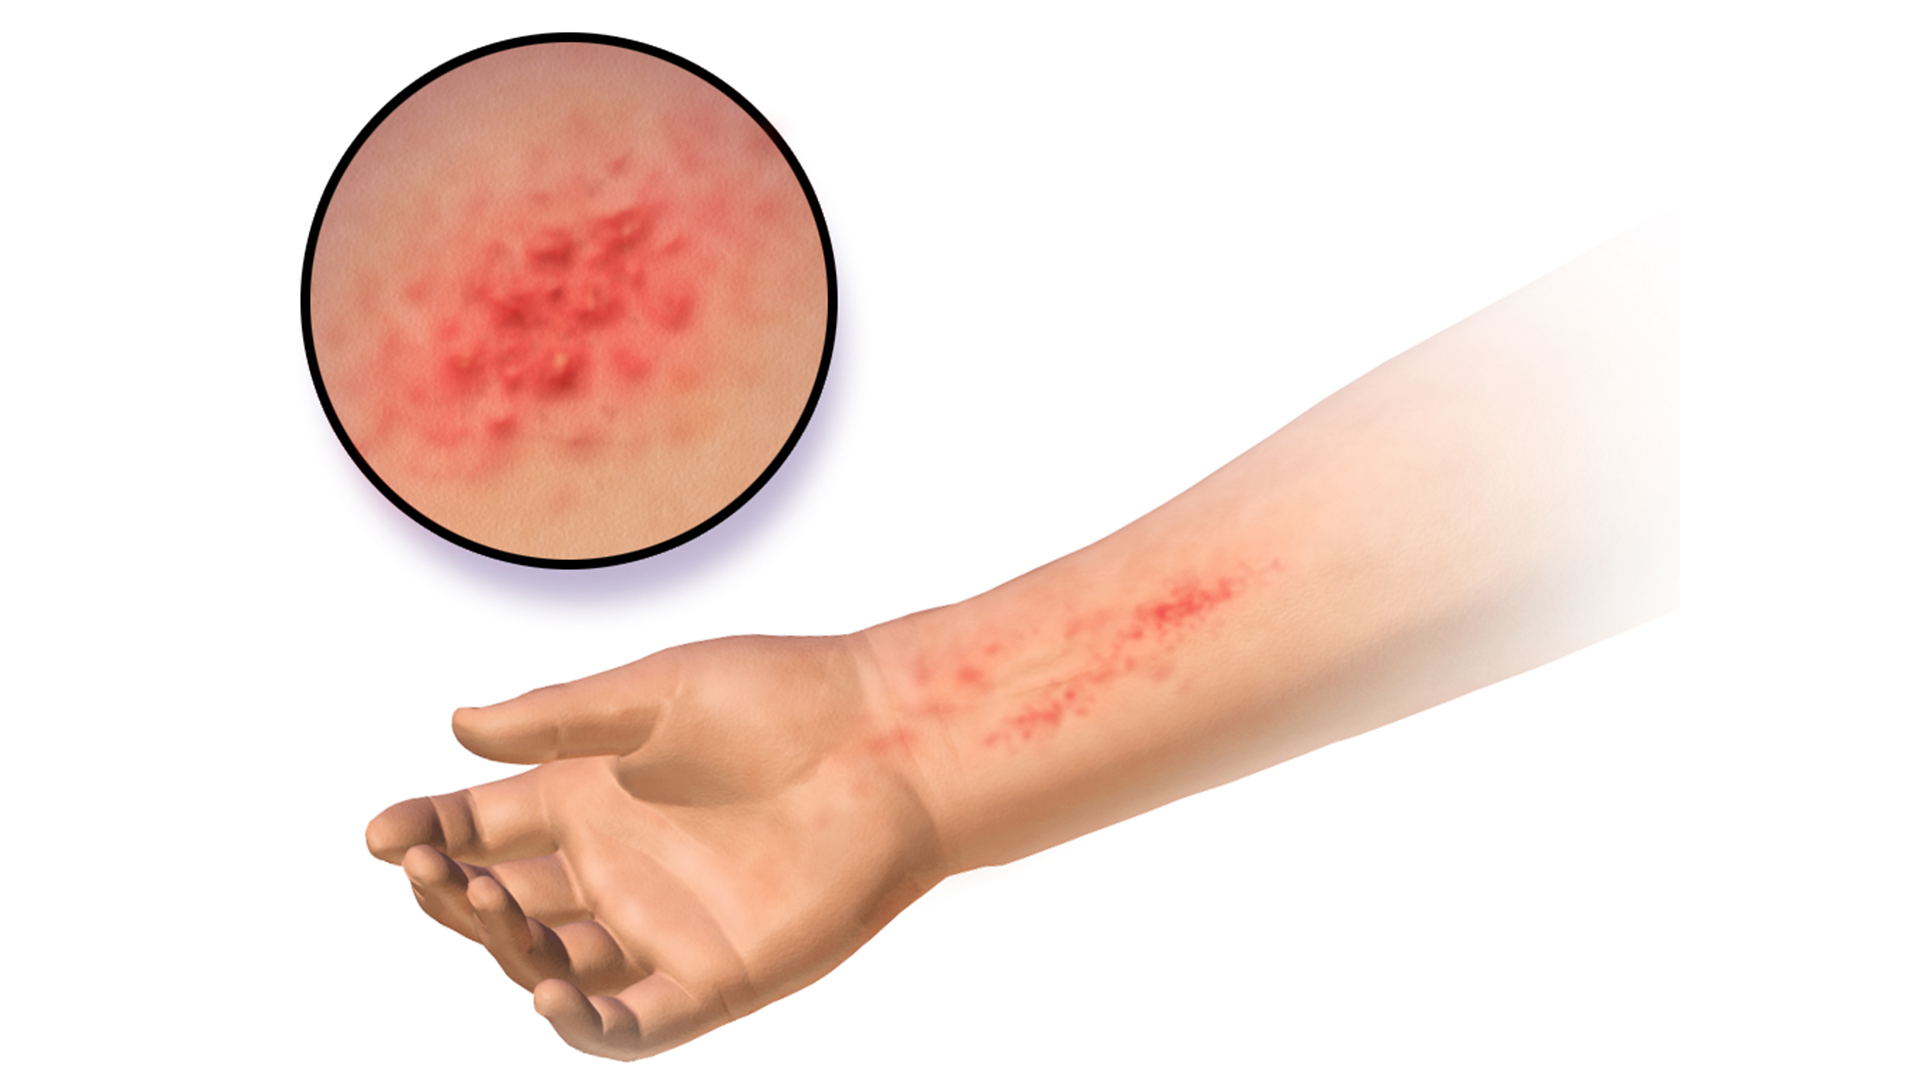 Illustration shows a red, bumpy rash on a fair-skinned person's arm